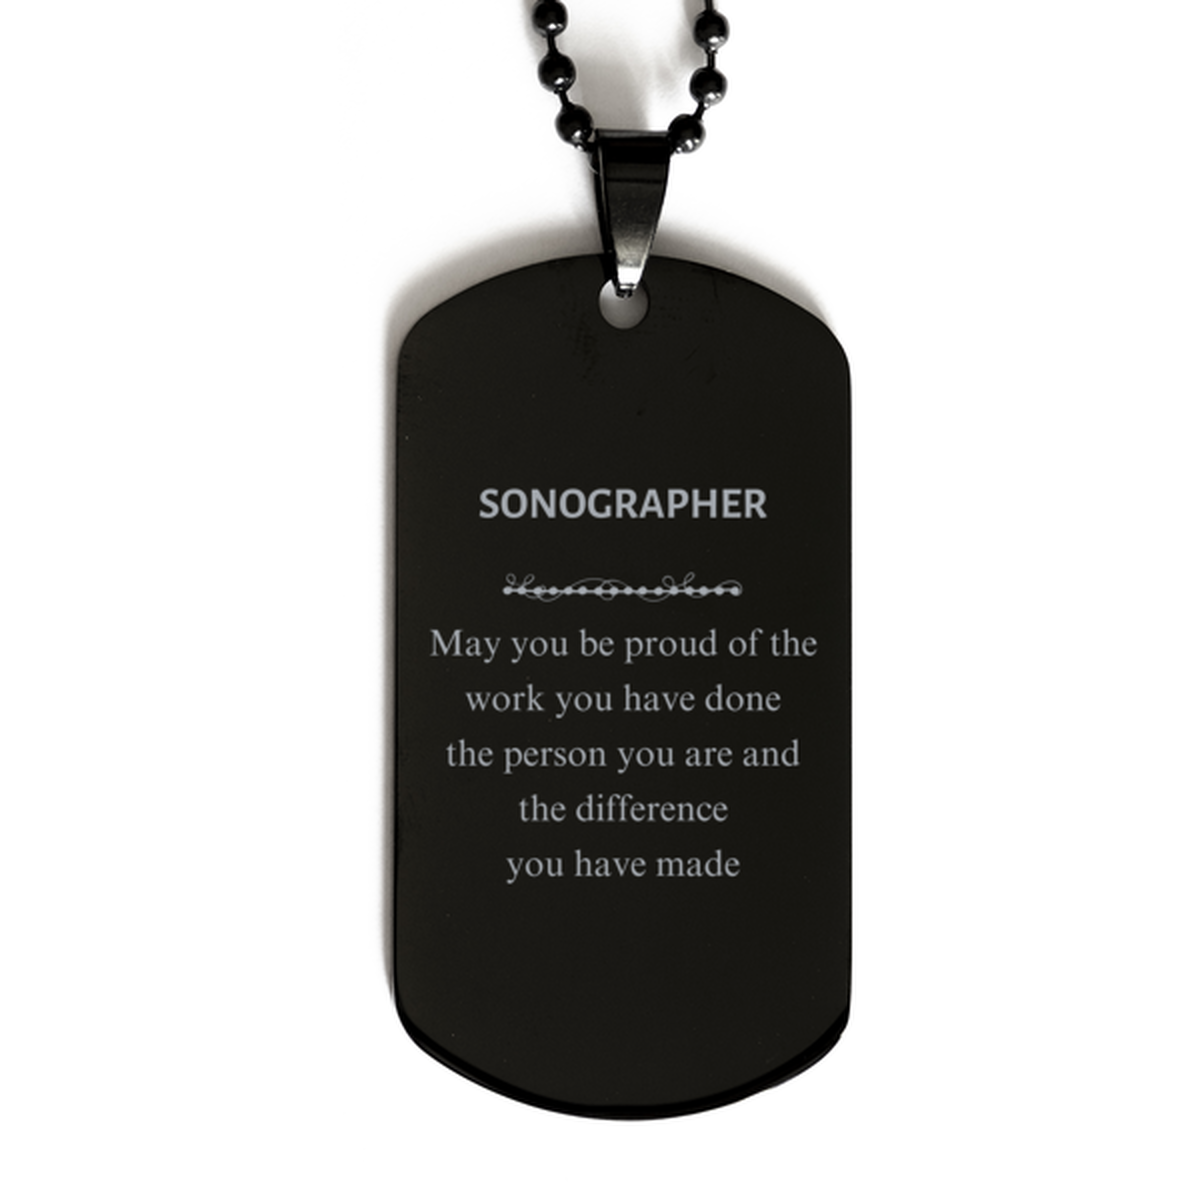 Sonographer May you be proud of the work you have done, Retirement Sonographer Black Dog Tag for Colleague Appreciation Gifts Amazing for Sonographer